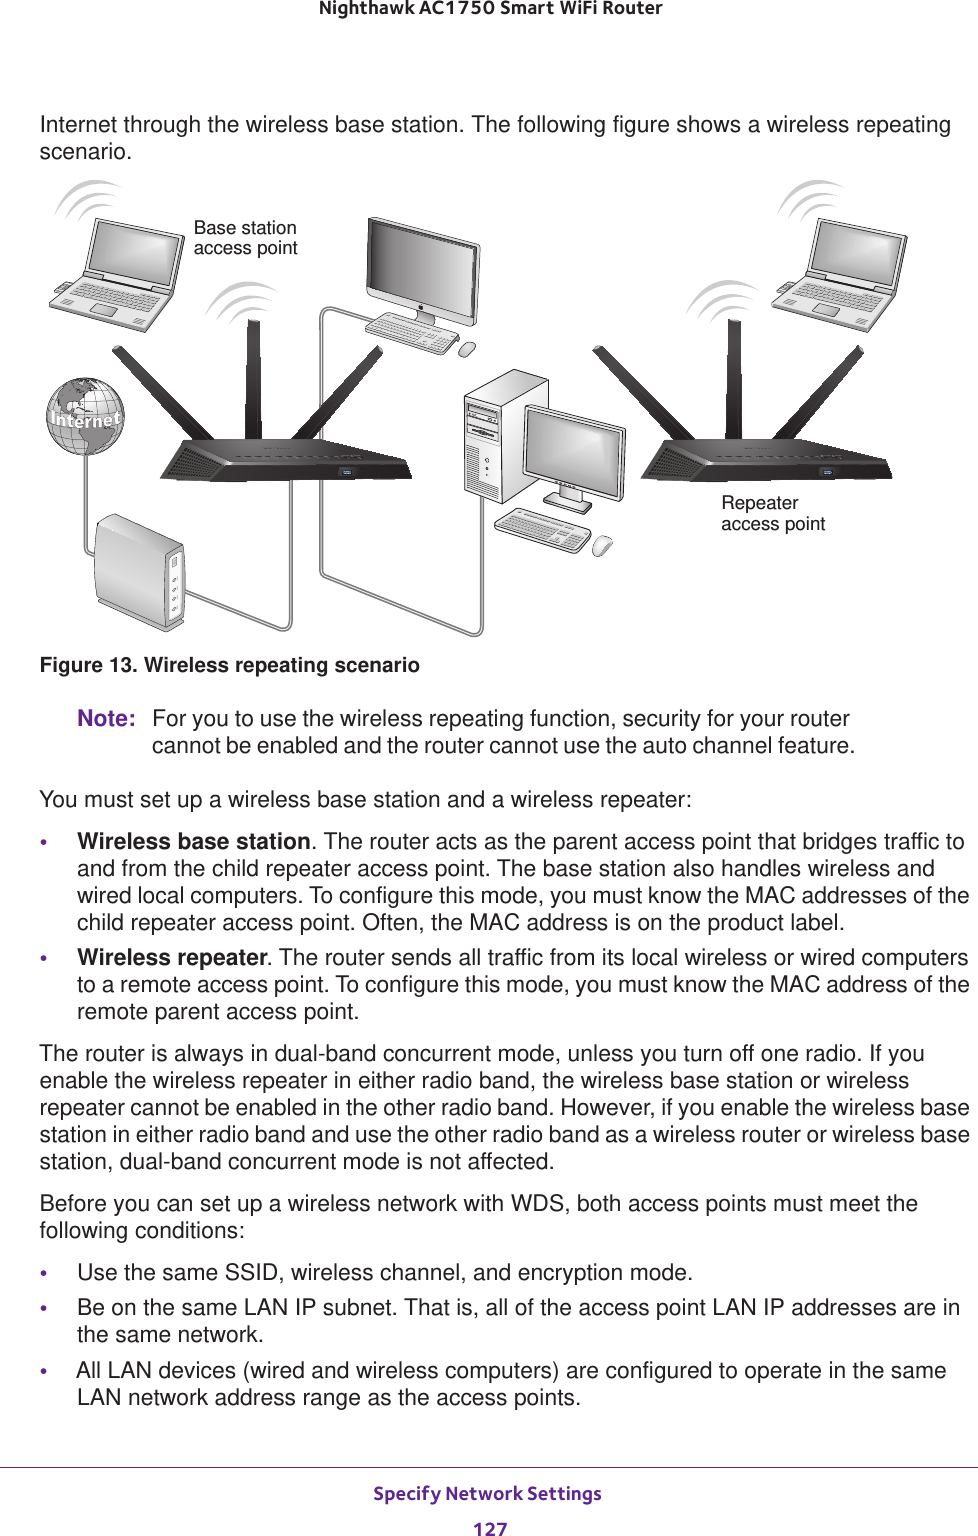 Specify Network Settings 127 Nighthawk AC1750 Smart WiFi RouterInternet through the wireless base station. The following figure shows a wireless repeating scenario.RepeaterBase stationaccess pointaccess pointFigure 13. Wireless repeating scenarioNote: For you to use the wireless repeating function, security for your router cannot be enabled and the router cannot use the auto channel feature.You must set up a wireless base station and a wireless repeater:•Wireless base station. The router acts as the parent access point that bridges traffic to and from the child repeater access point. The base station also handles wireless and wired local computers. To configure this mode, you must know the MAC addresses of the child repeater access point. Often, the MAC address is on the product label.•Wireless repeater. The router sends all traffic from its local wireless or wired computers to a remote access point. To configure this mode, you must know the MAC address of the remote parent access point. The router is always in dual-band concurrent mode, unless you turn off one radio. If you enable the wireless repeater in either radio band, the wireless base station or wireless repeater cannot be enabled in the other radio band. However, if you enable the wireless base station in either radio band and use the other radio band as a wireless router or wireless base station, dual-band concurrent mode is not affected.Before you can set up a wireless network with WDS, both access points must meet the following conditions:•Use the same SSID, wireless channel, and encryption mode.•Be on the same LAN IP subnet. That is, all of the access point LAN IP addresses are in the same network.•All LAN devices (wired and wireless computers) are configured to operate in the same LAN network address range as the access points.